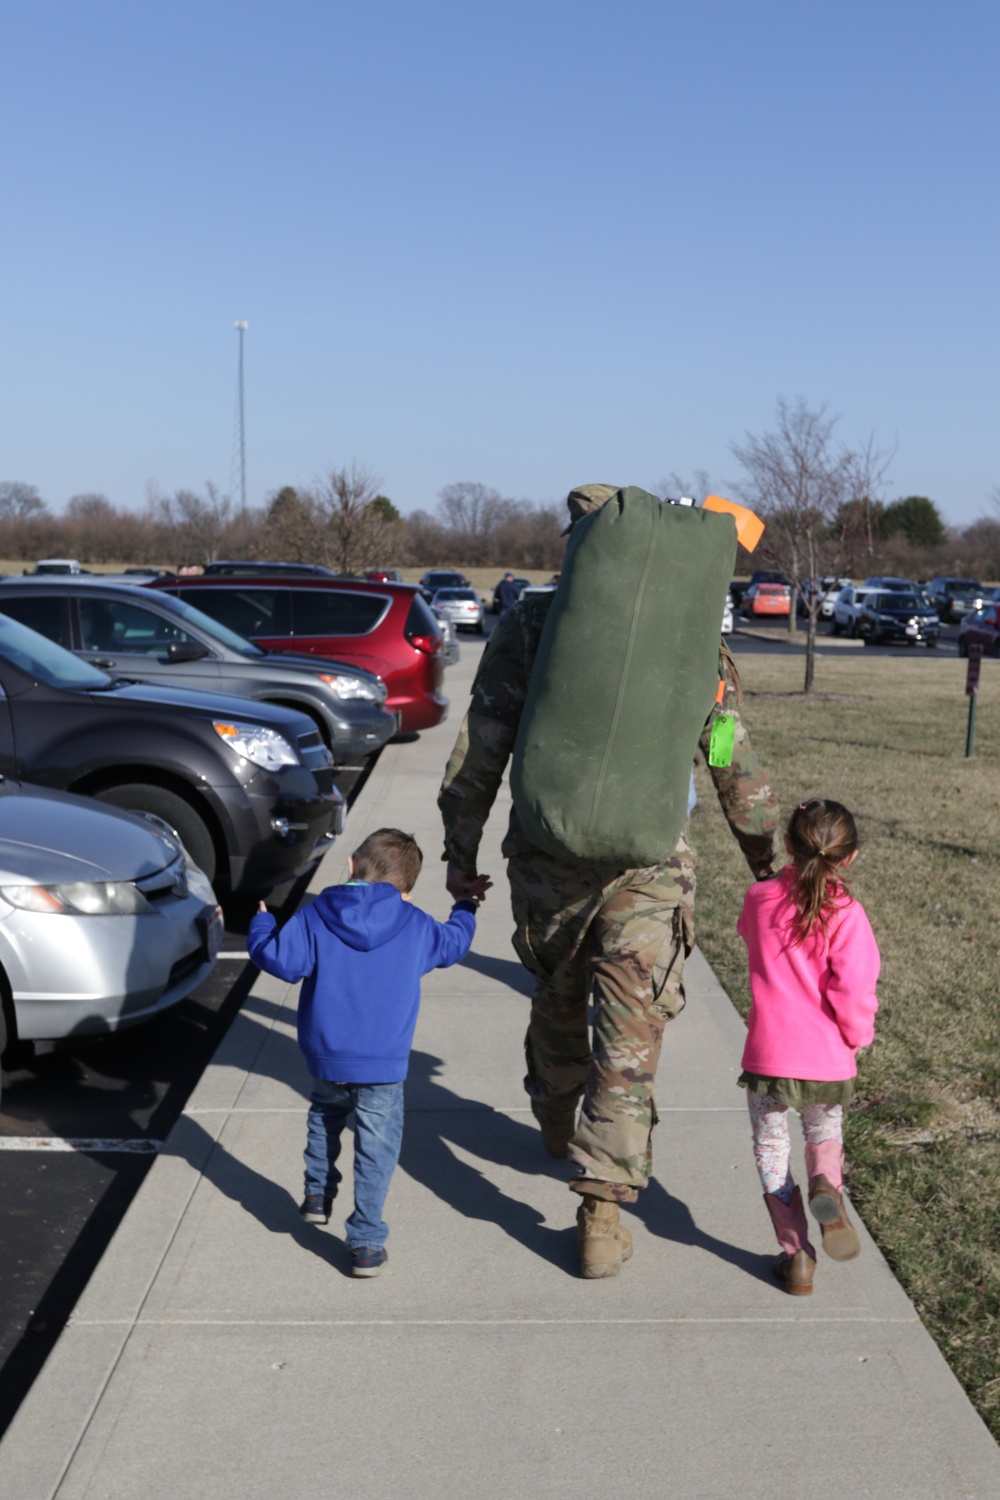 Soldiers of 371st Sustainment Brigade return home following deployment to Southwest Asia